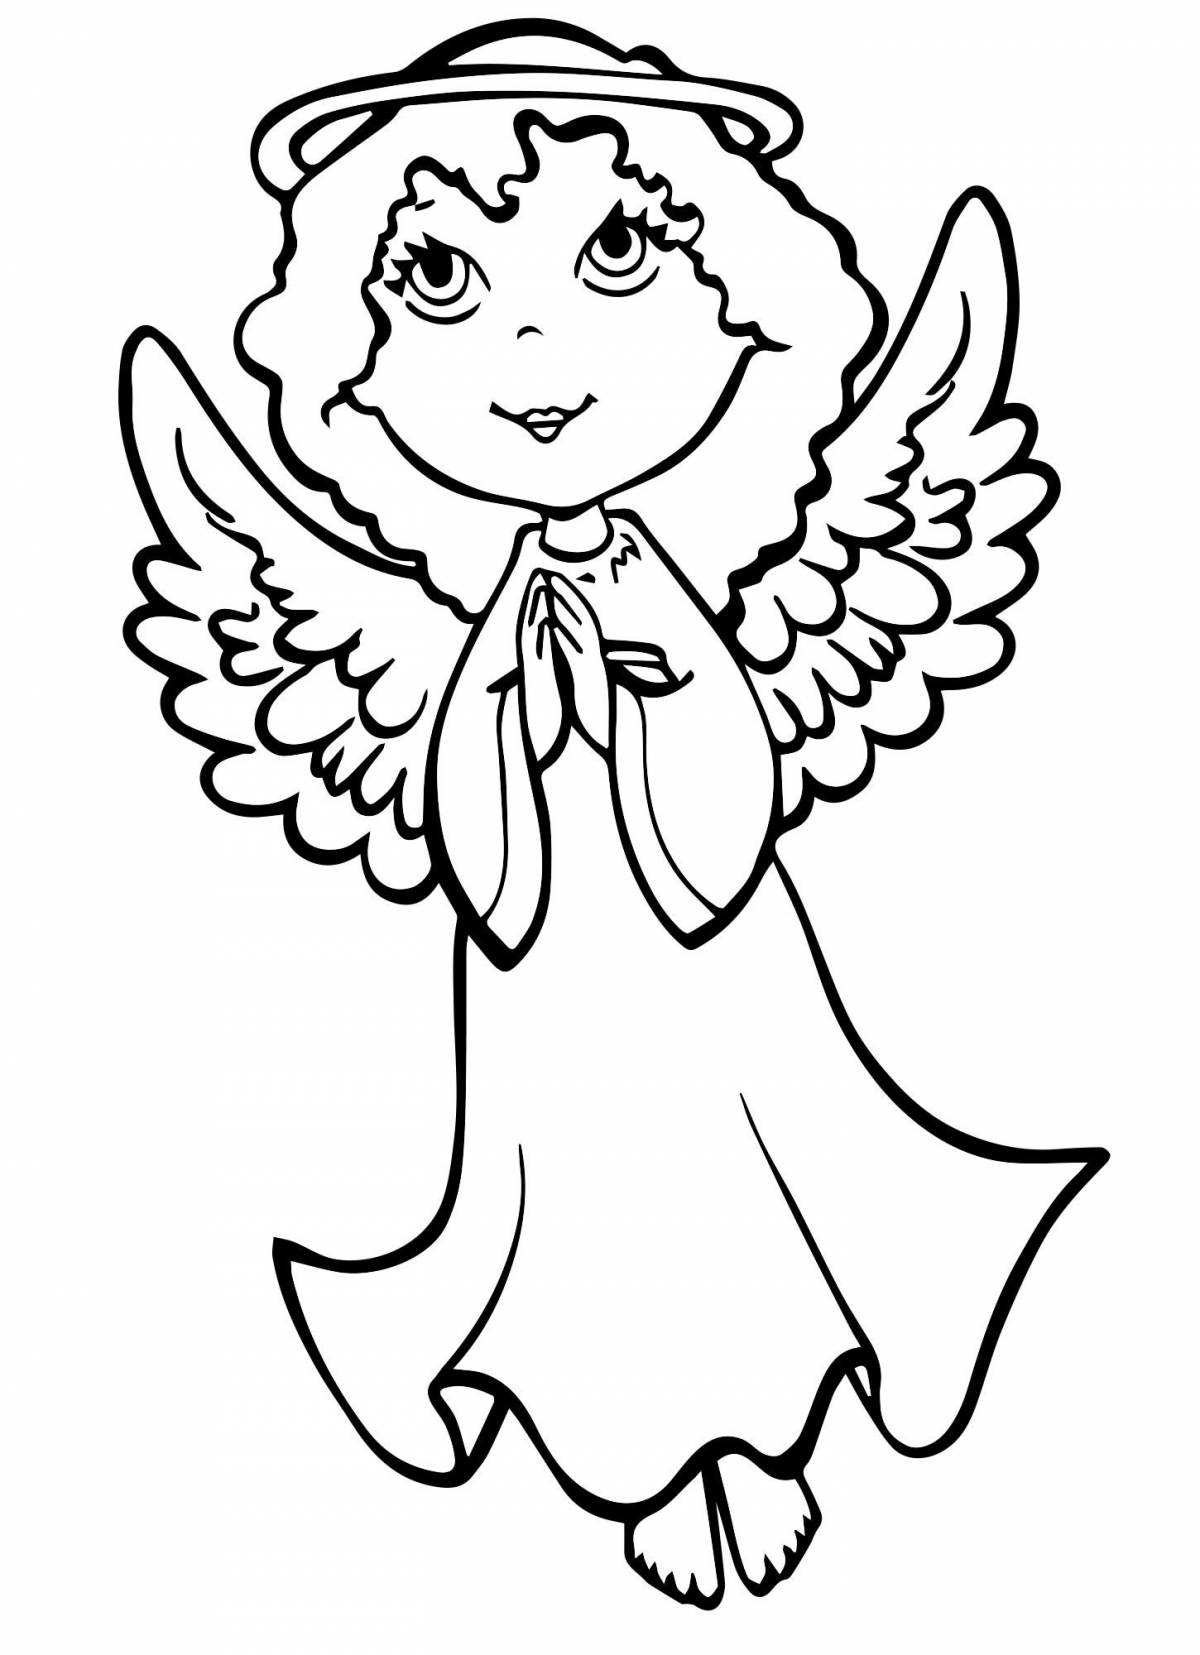 Effective angel coloring by numbers